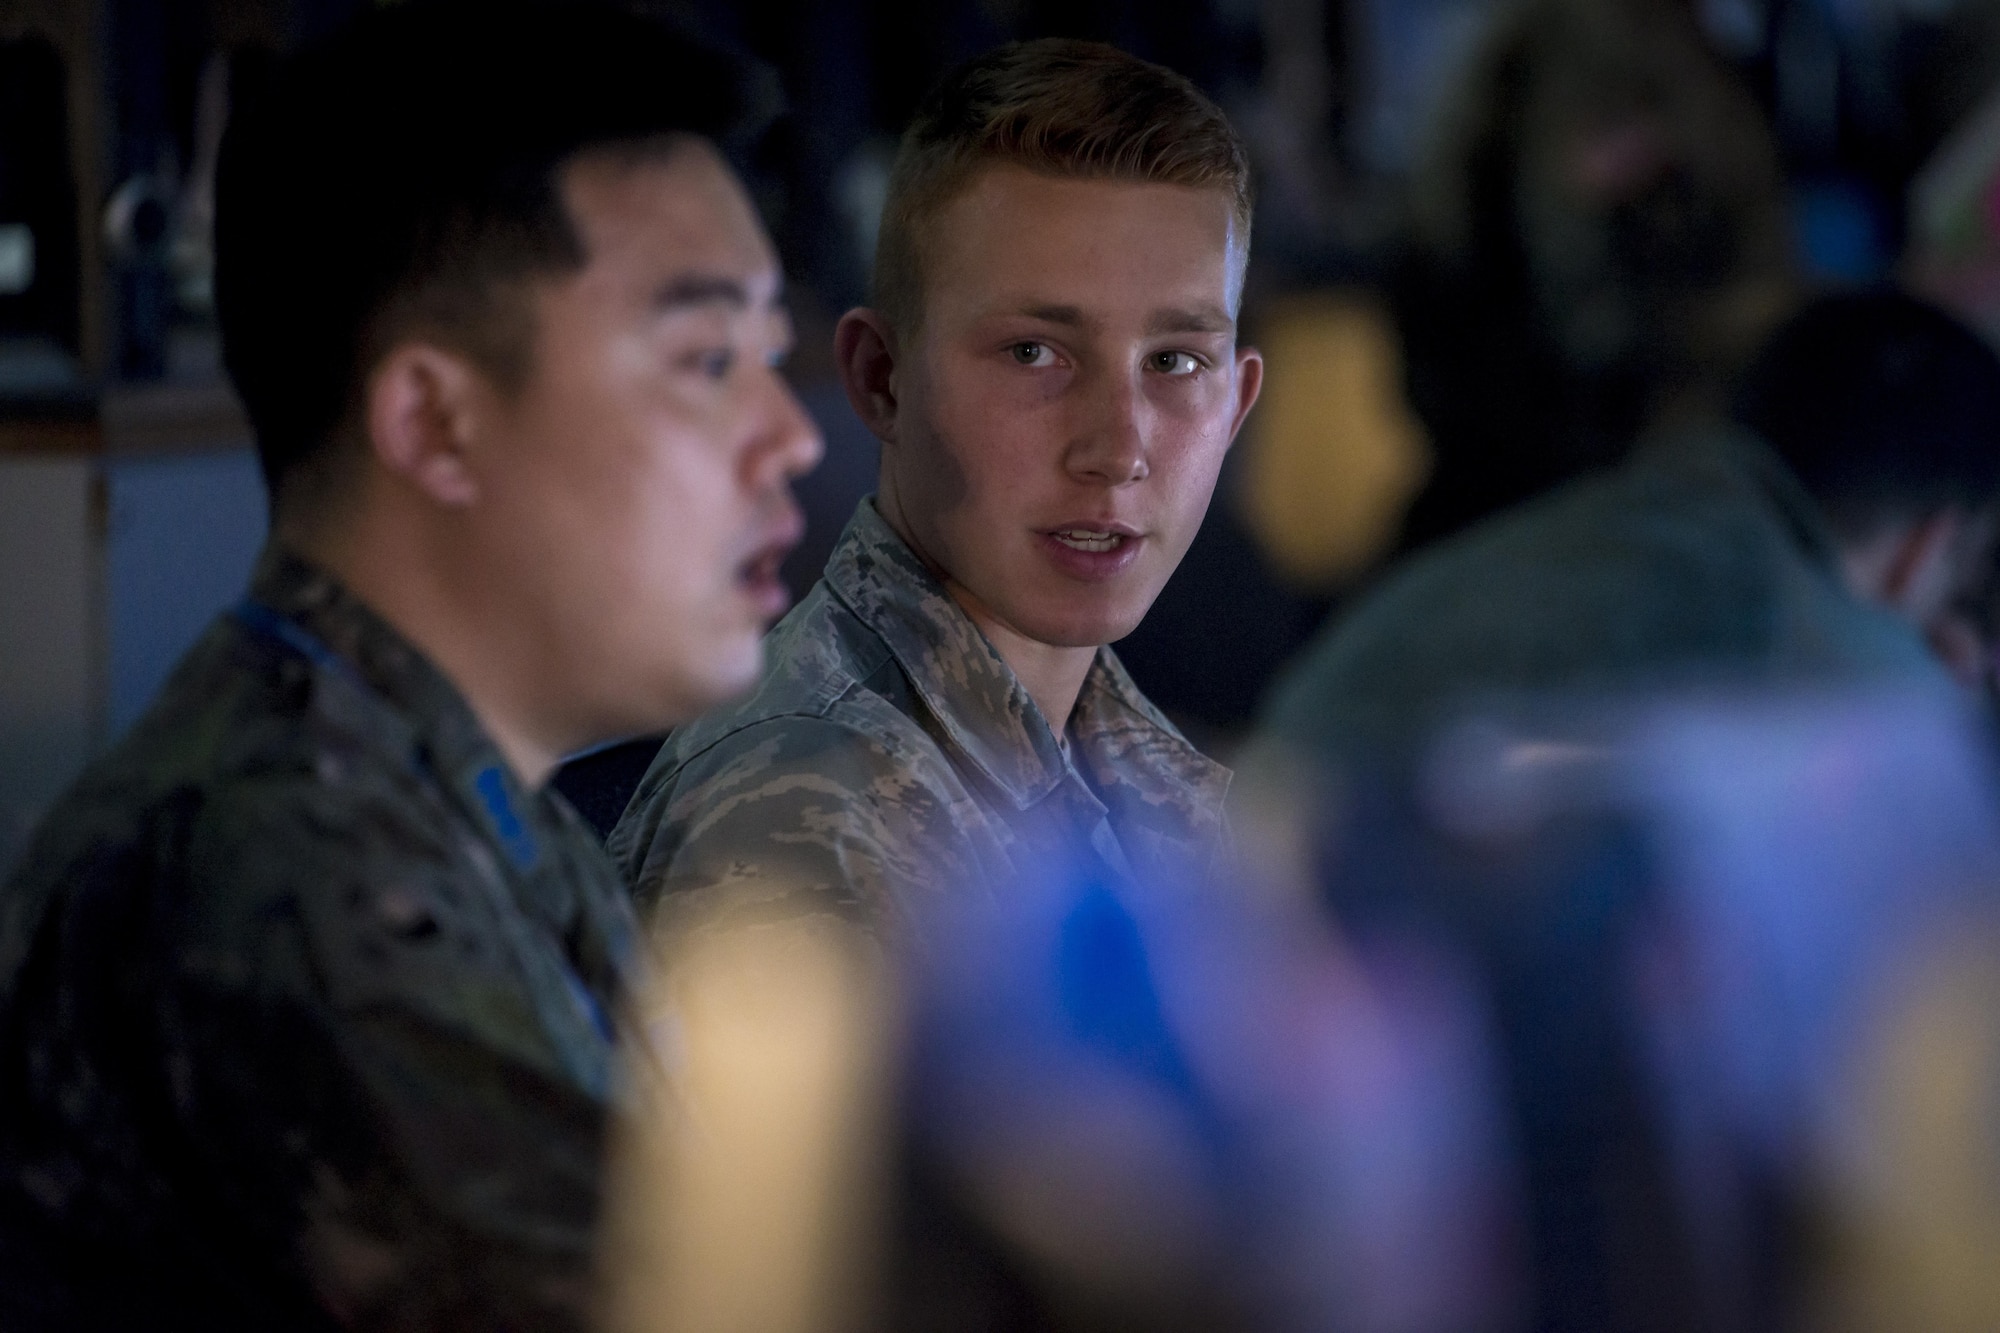 U.S. Air Force Senior Airman Ivan Cooper, right, and Republic of Korea Air Force 1st Lt. Jaewon Yoo with the Osan Weather Squadron, left, discuss the day’s weather before preparing their combined slides and briefing for the general during Key Resolve at Osan Air Base, Republic of Korea, March 20, 2017. Weather forecasts are critical as countless factors can contribute to the outcome of a mission. Weather specialists keep a constant watch over the forecast and conditions that can affect the safety of pilots and aircrew. These experts utilize the latest technology to predict weather patterns, prepare forecasts and communicate weather information to commanders and pilots so that every mission goes as planned. Cooper is with the 15th Operations Support Squadron at Joint Base Pearl Harbor-Hickam, Hawaii. (U.S. Air Force photo by Staff Sgt. Benjamin W. Stratton)